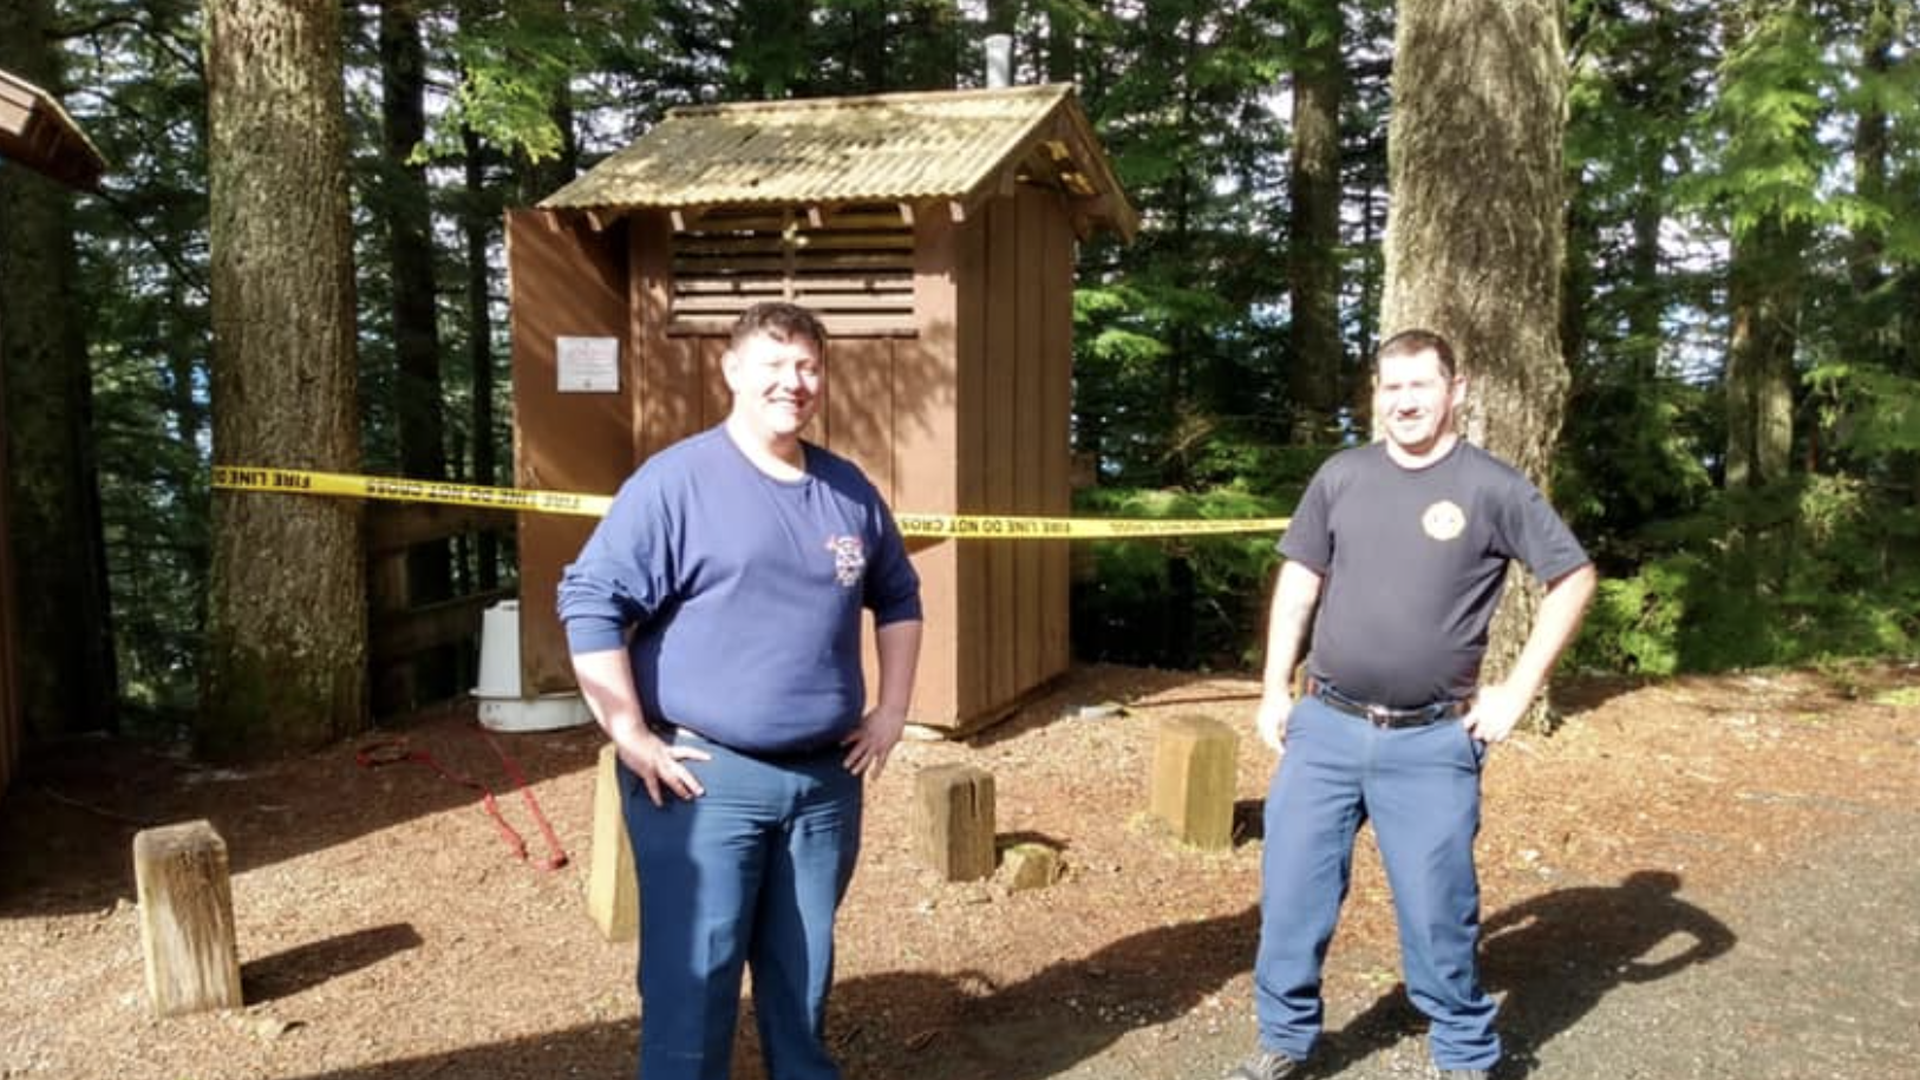 Firefighters who rescued toilet-trapped tourist/ By permission of Brinnon Fire Department